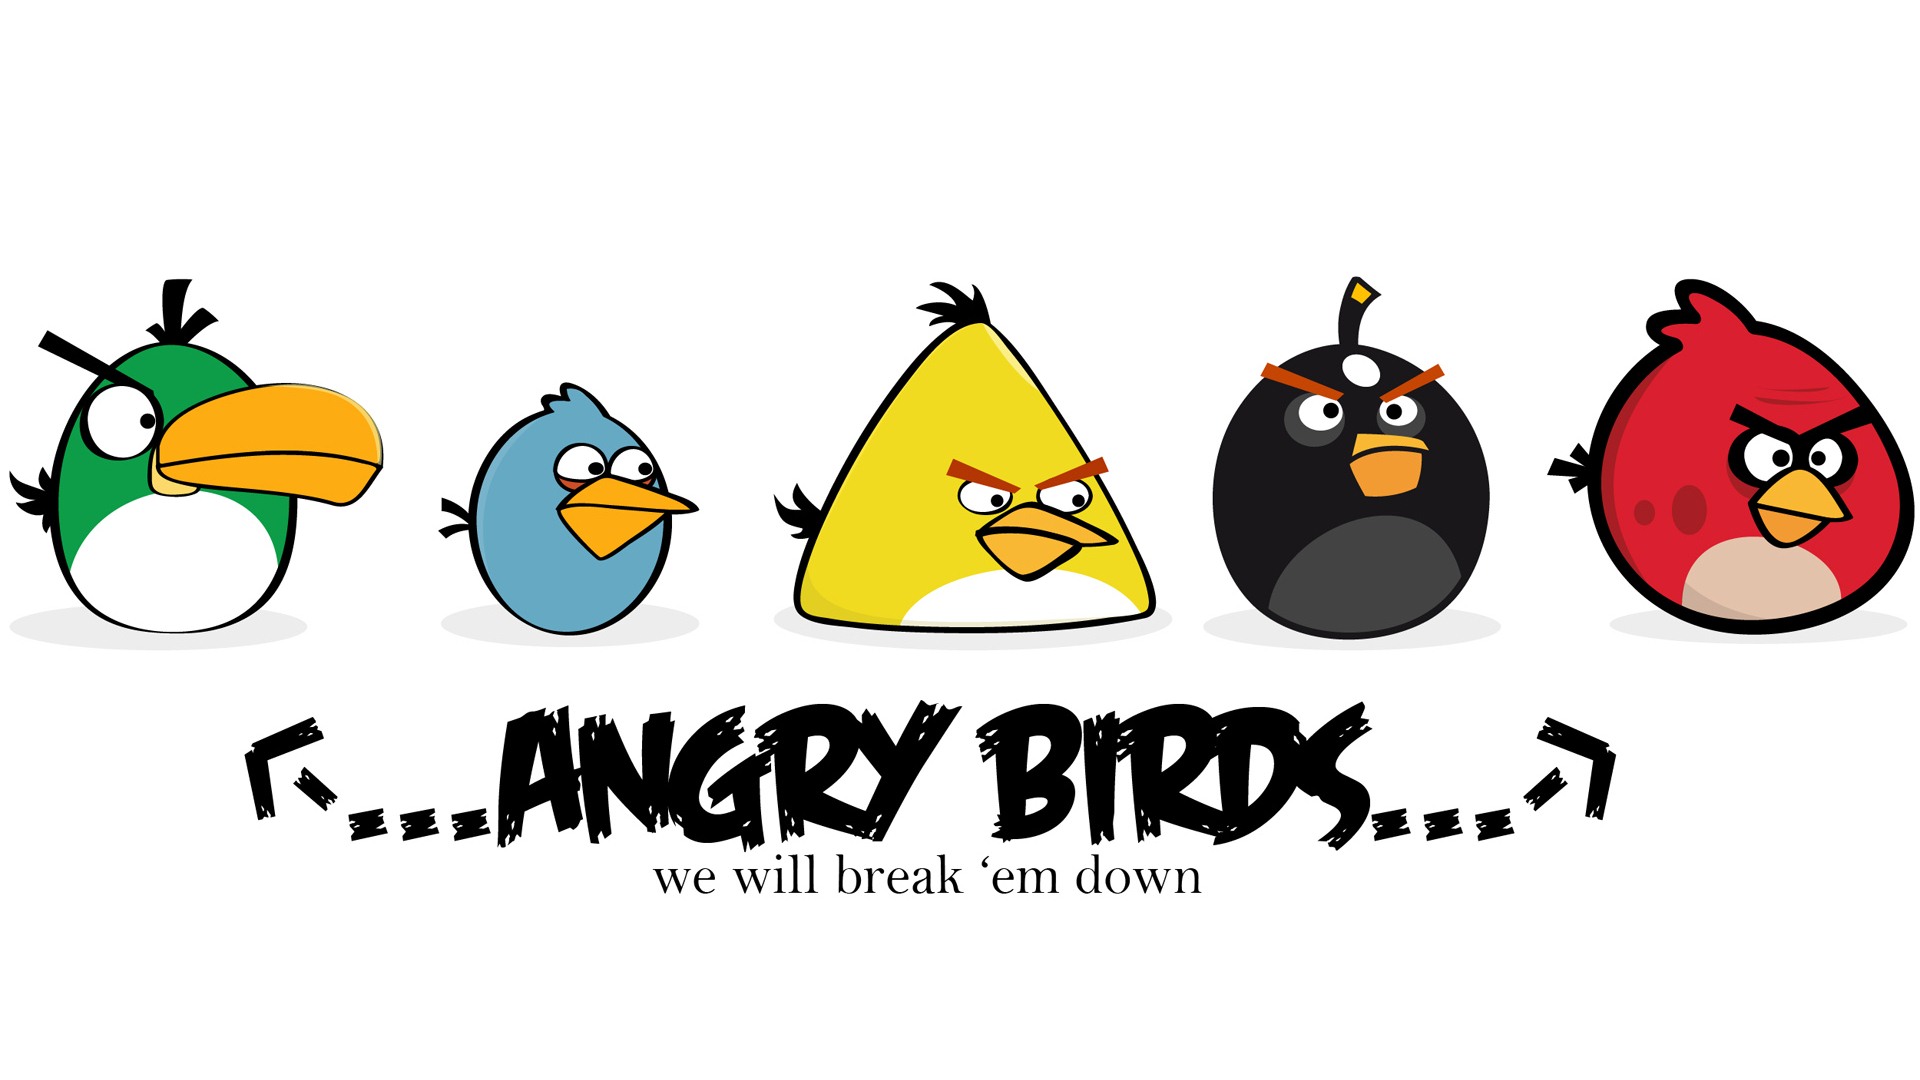 Angry Birds Game Wallpapers #2 - 1920x1080